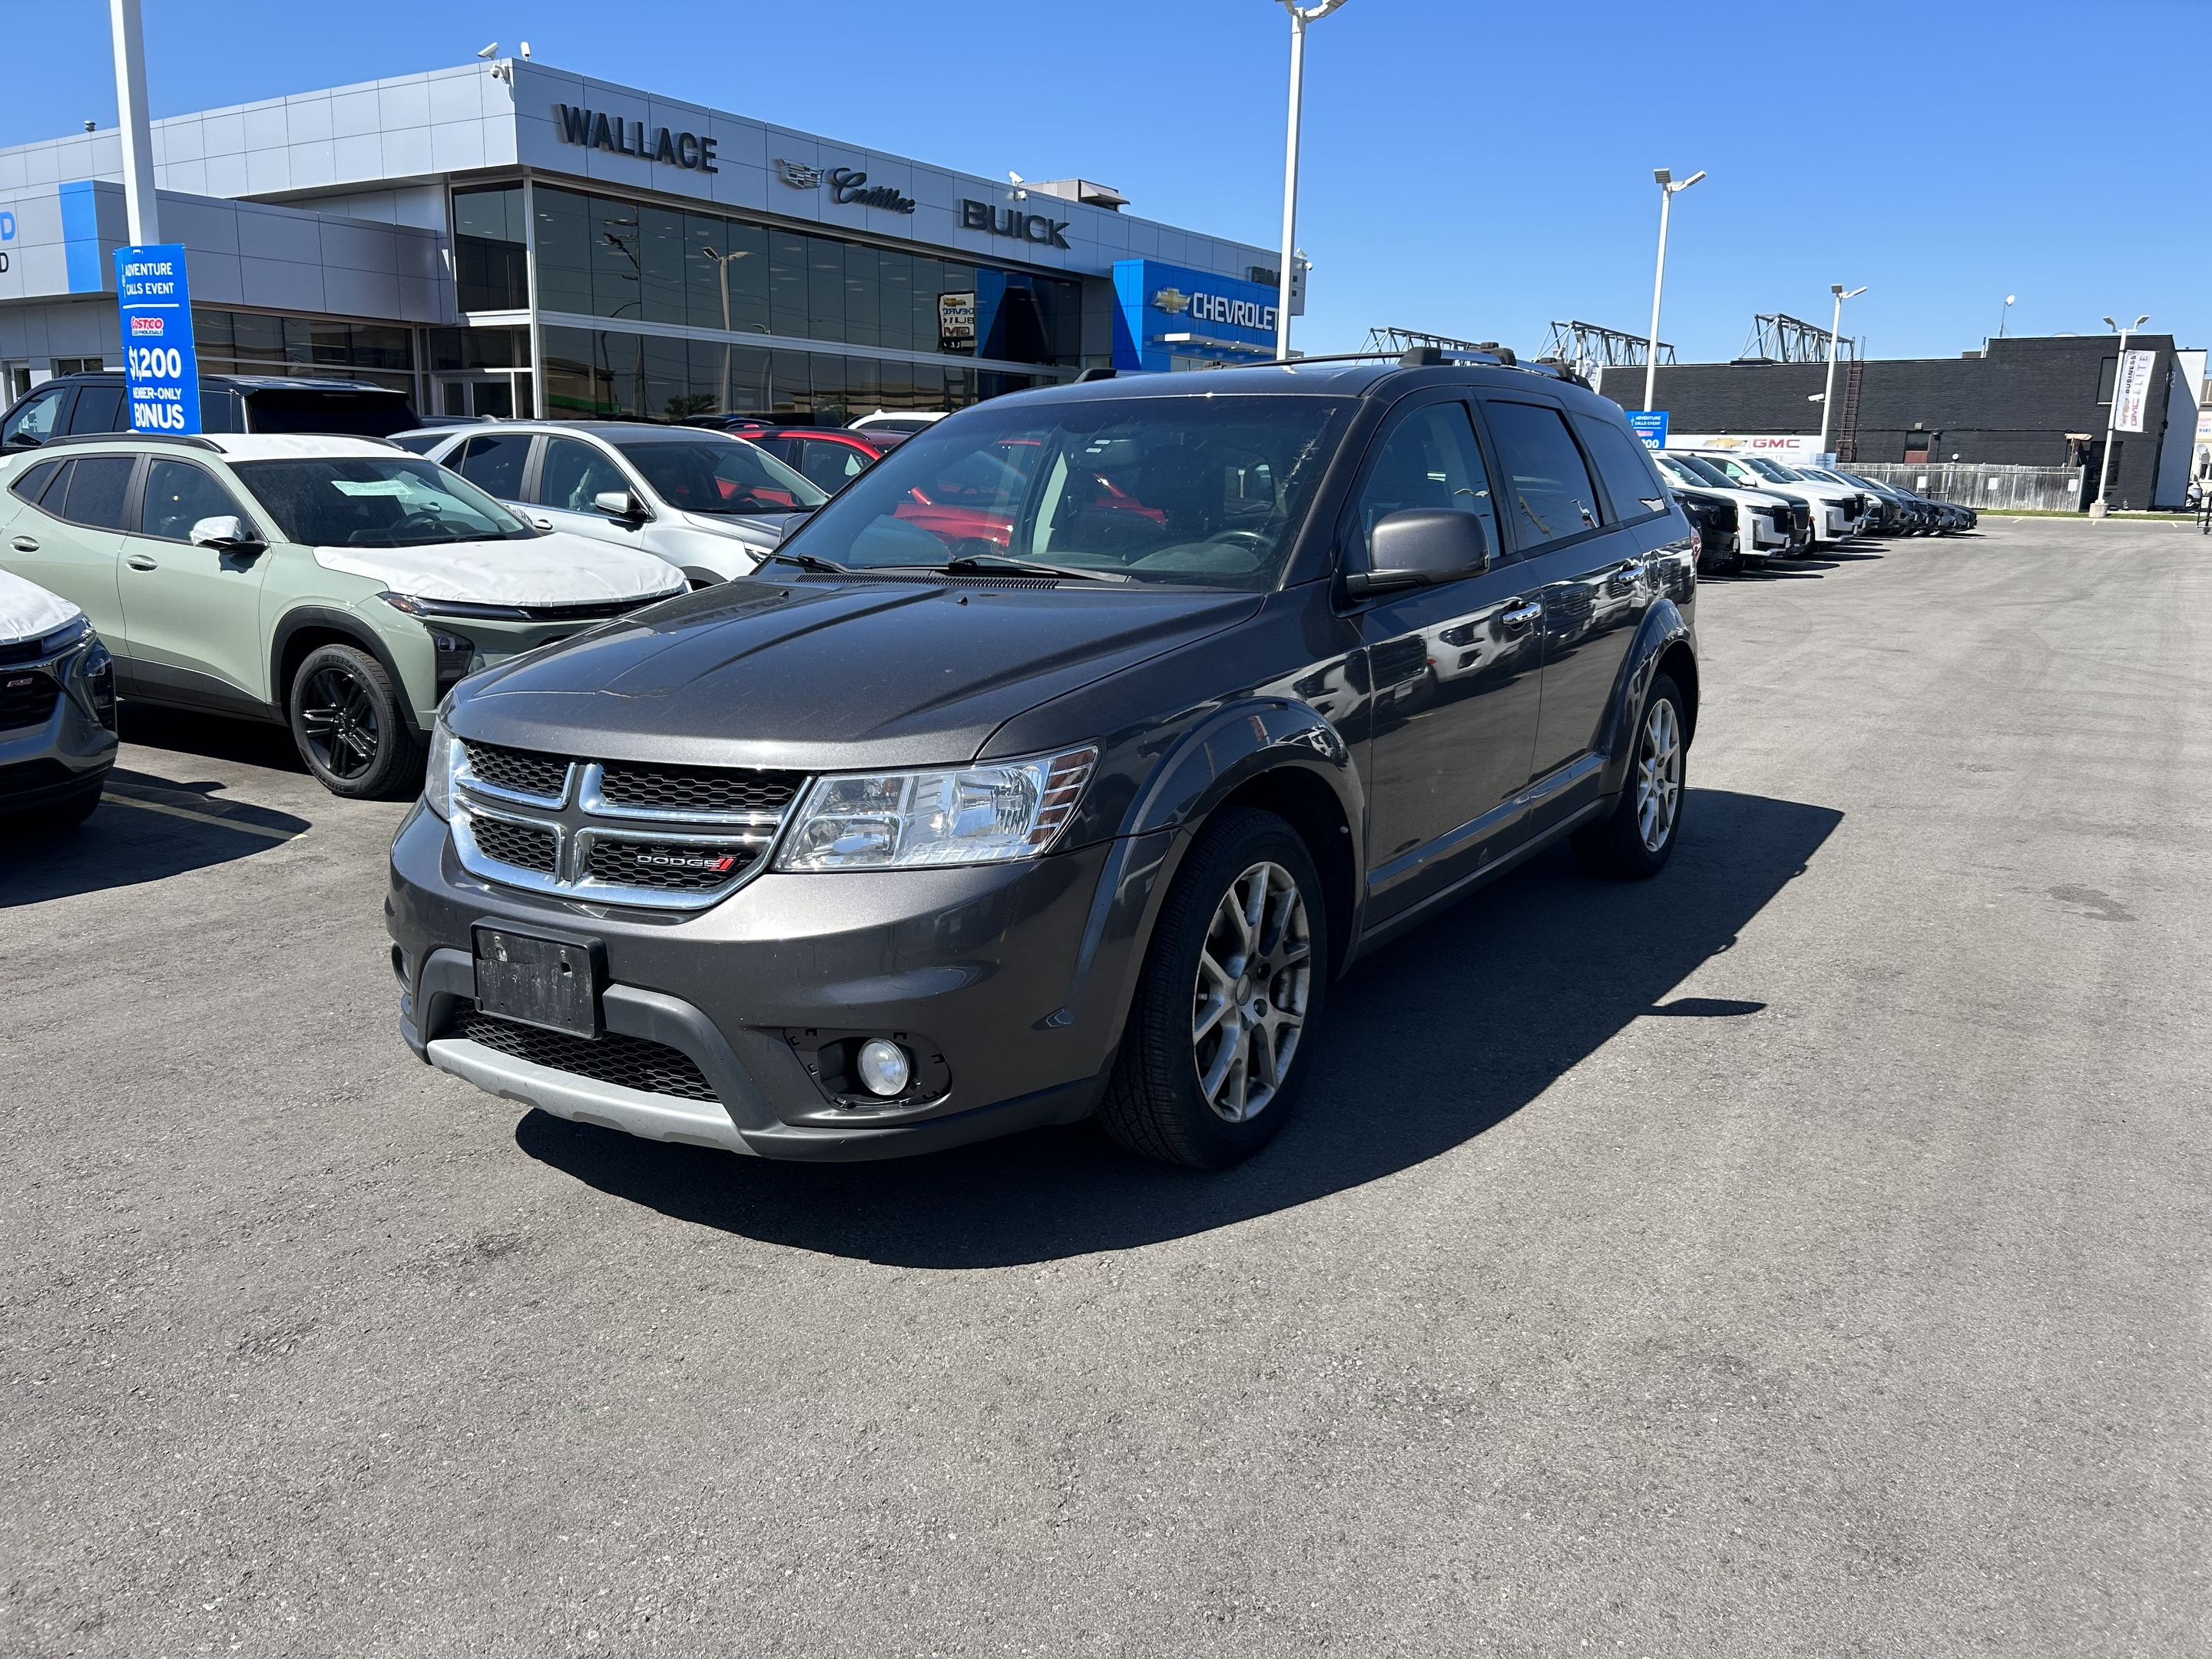 2014 Dodge Journey AWD 4dr R-T, Sunroof, Winter tires